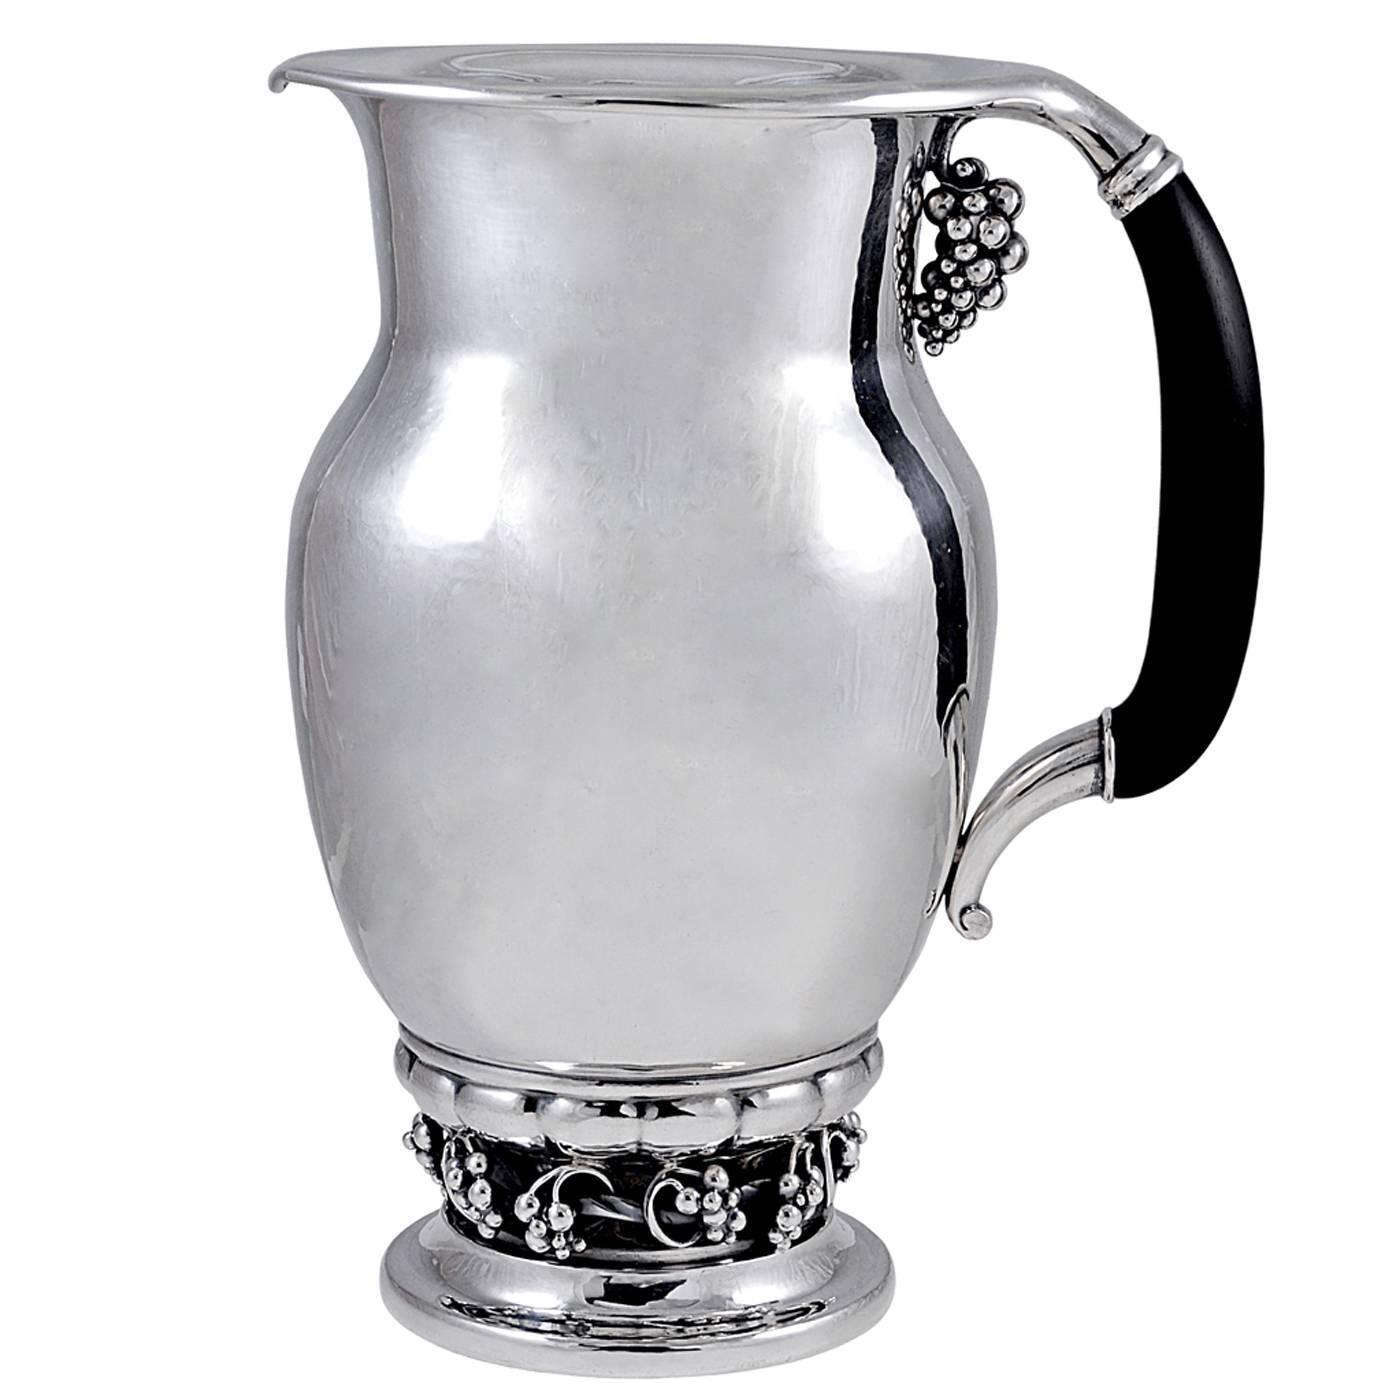 Georg Jensen Silver and Ebony Pitcher No. 407B For Sale